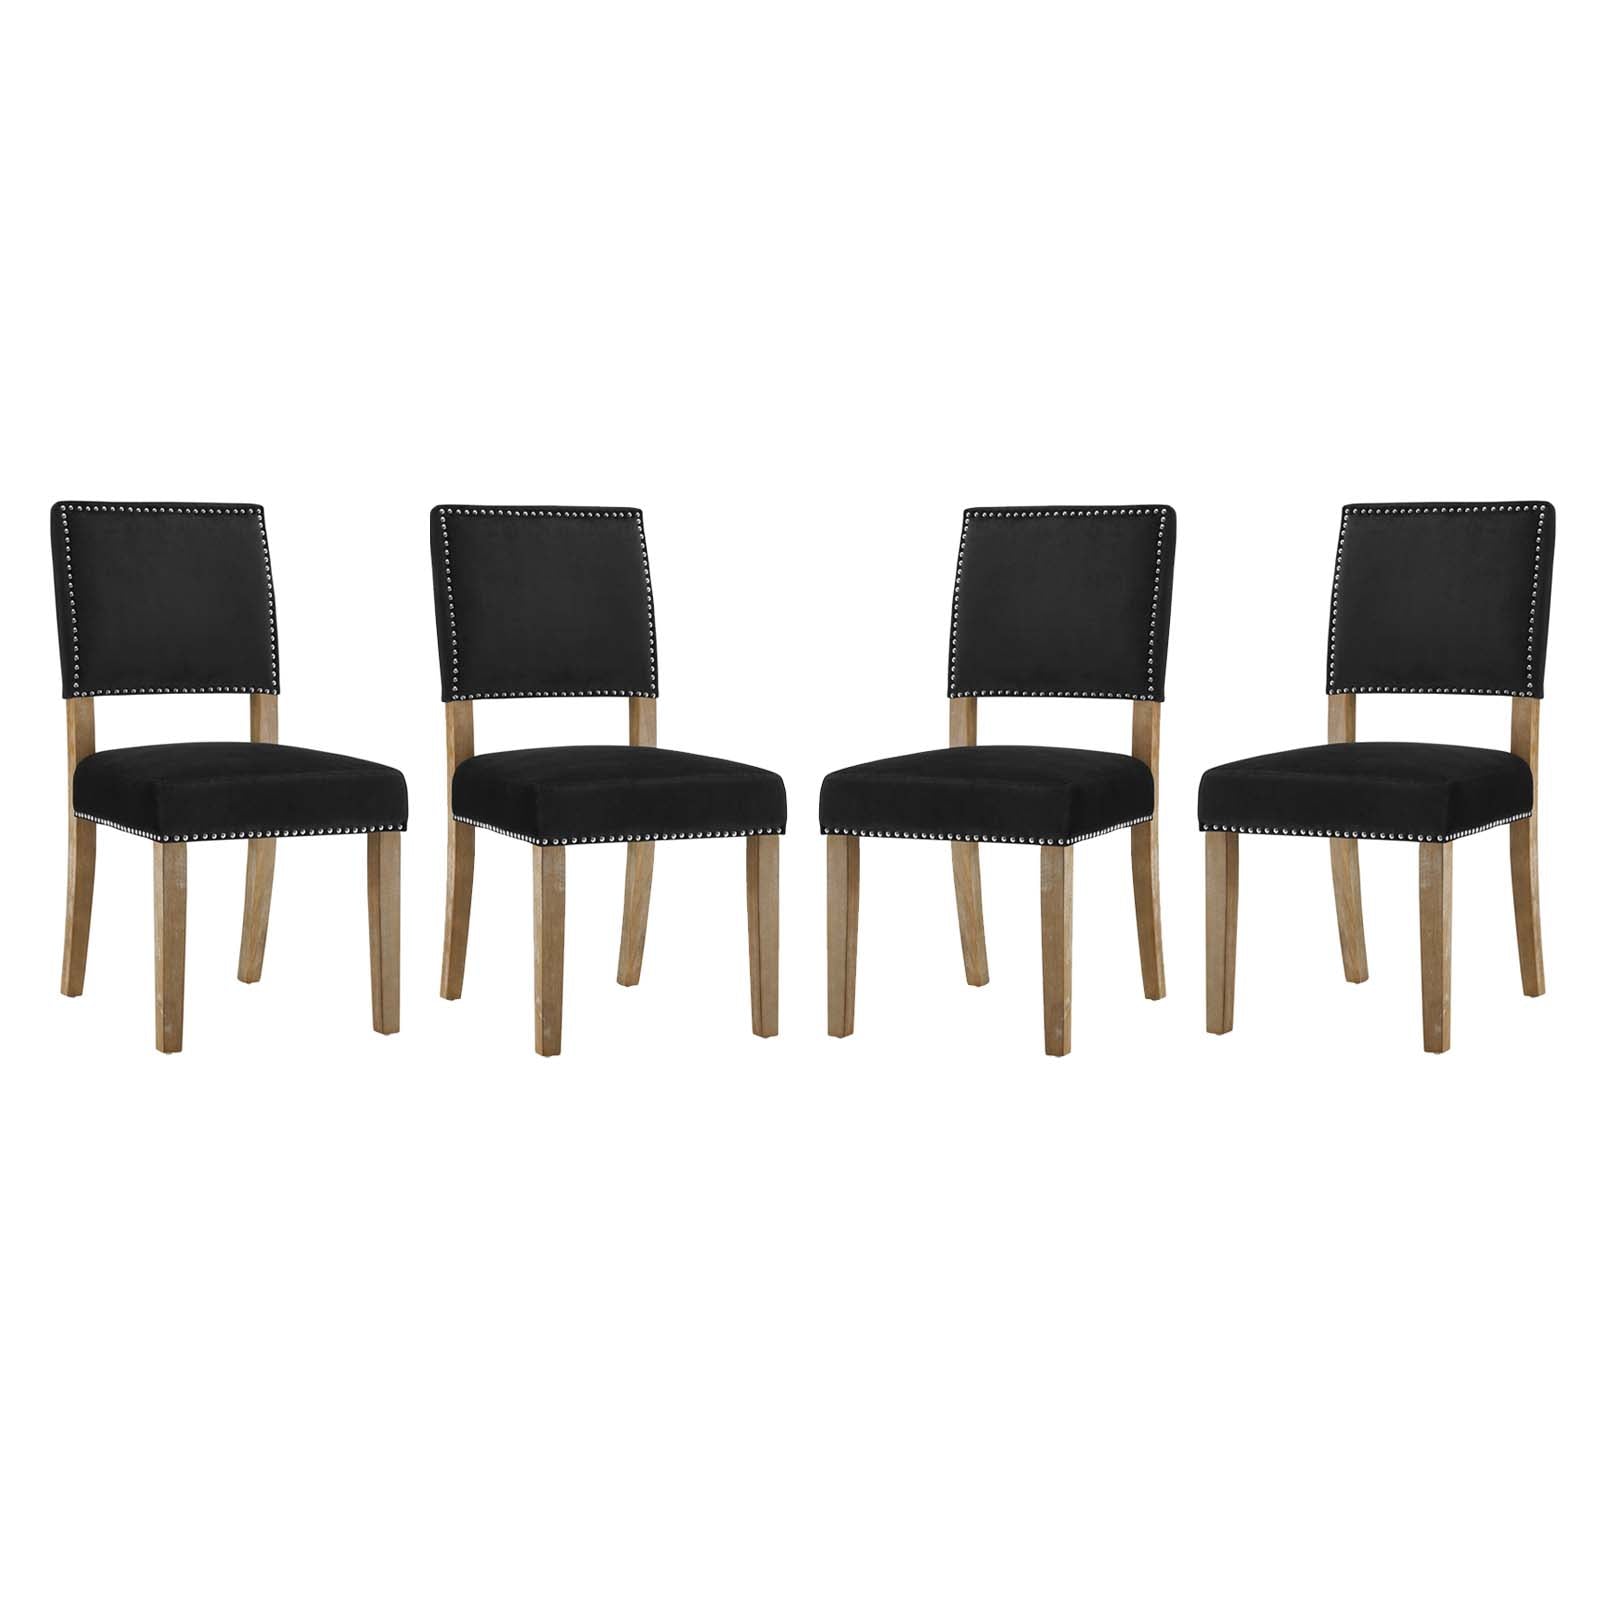 Oblige Dining Chair Wood Set of 4 - East Shore Modern Home Furnishings